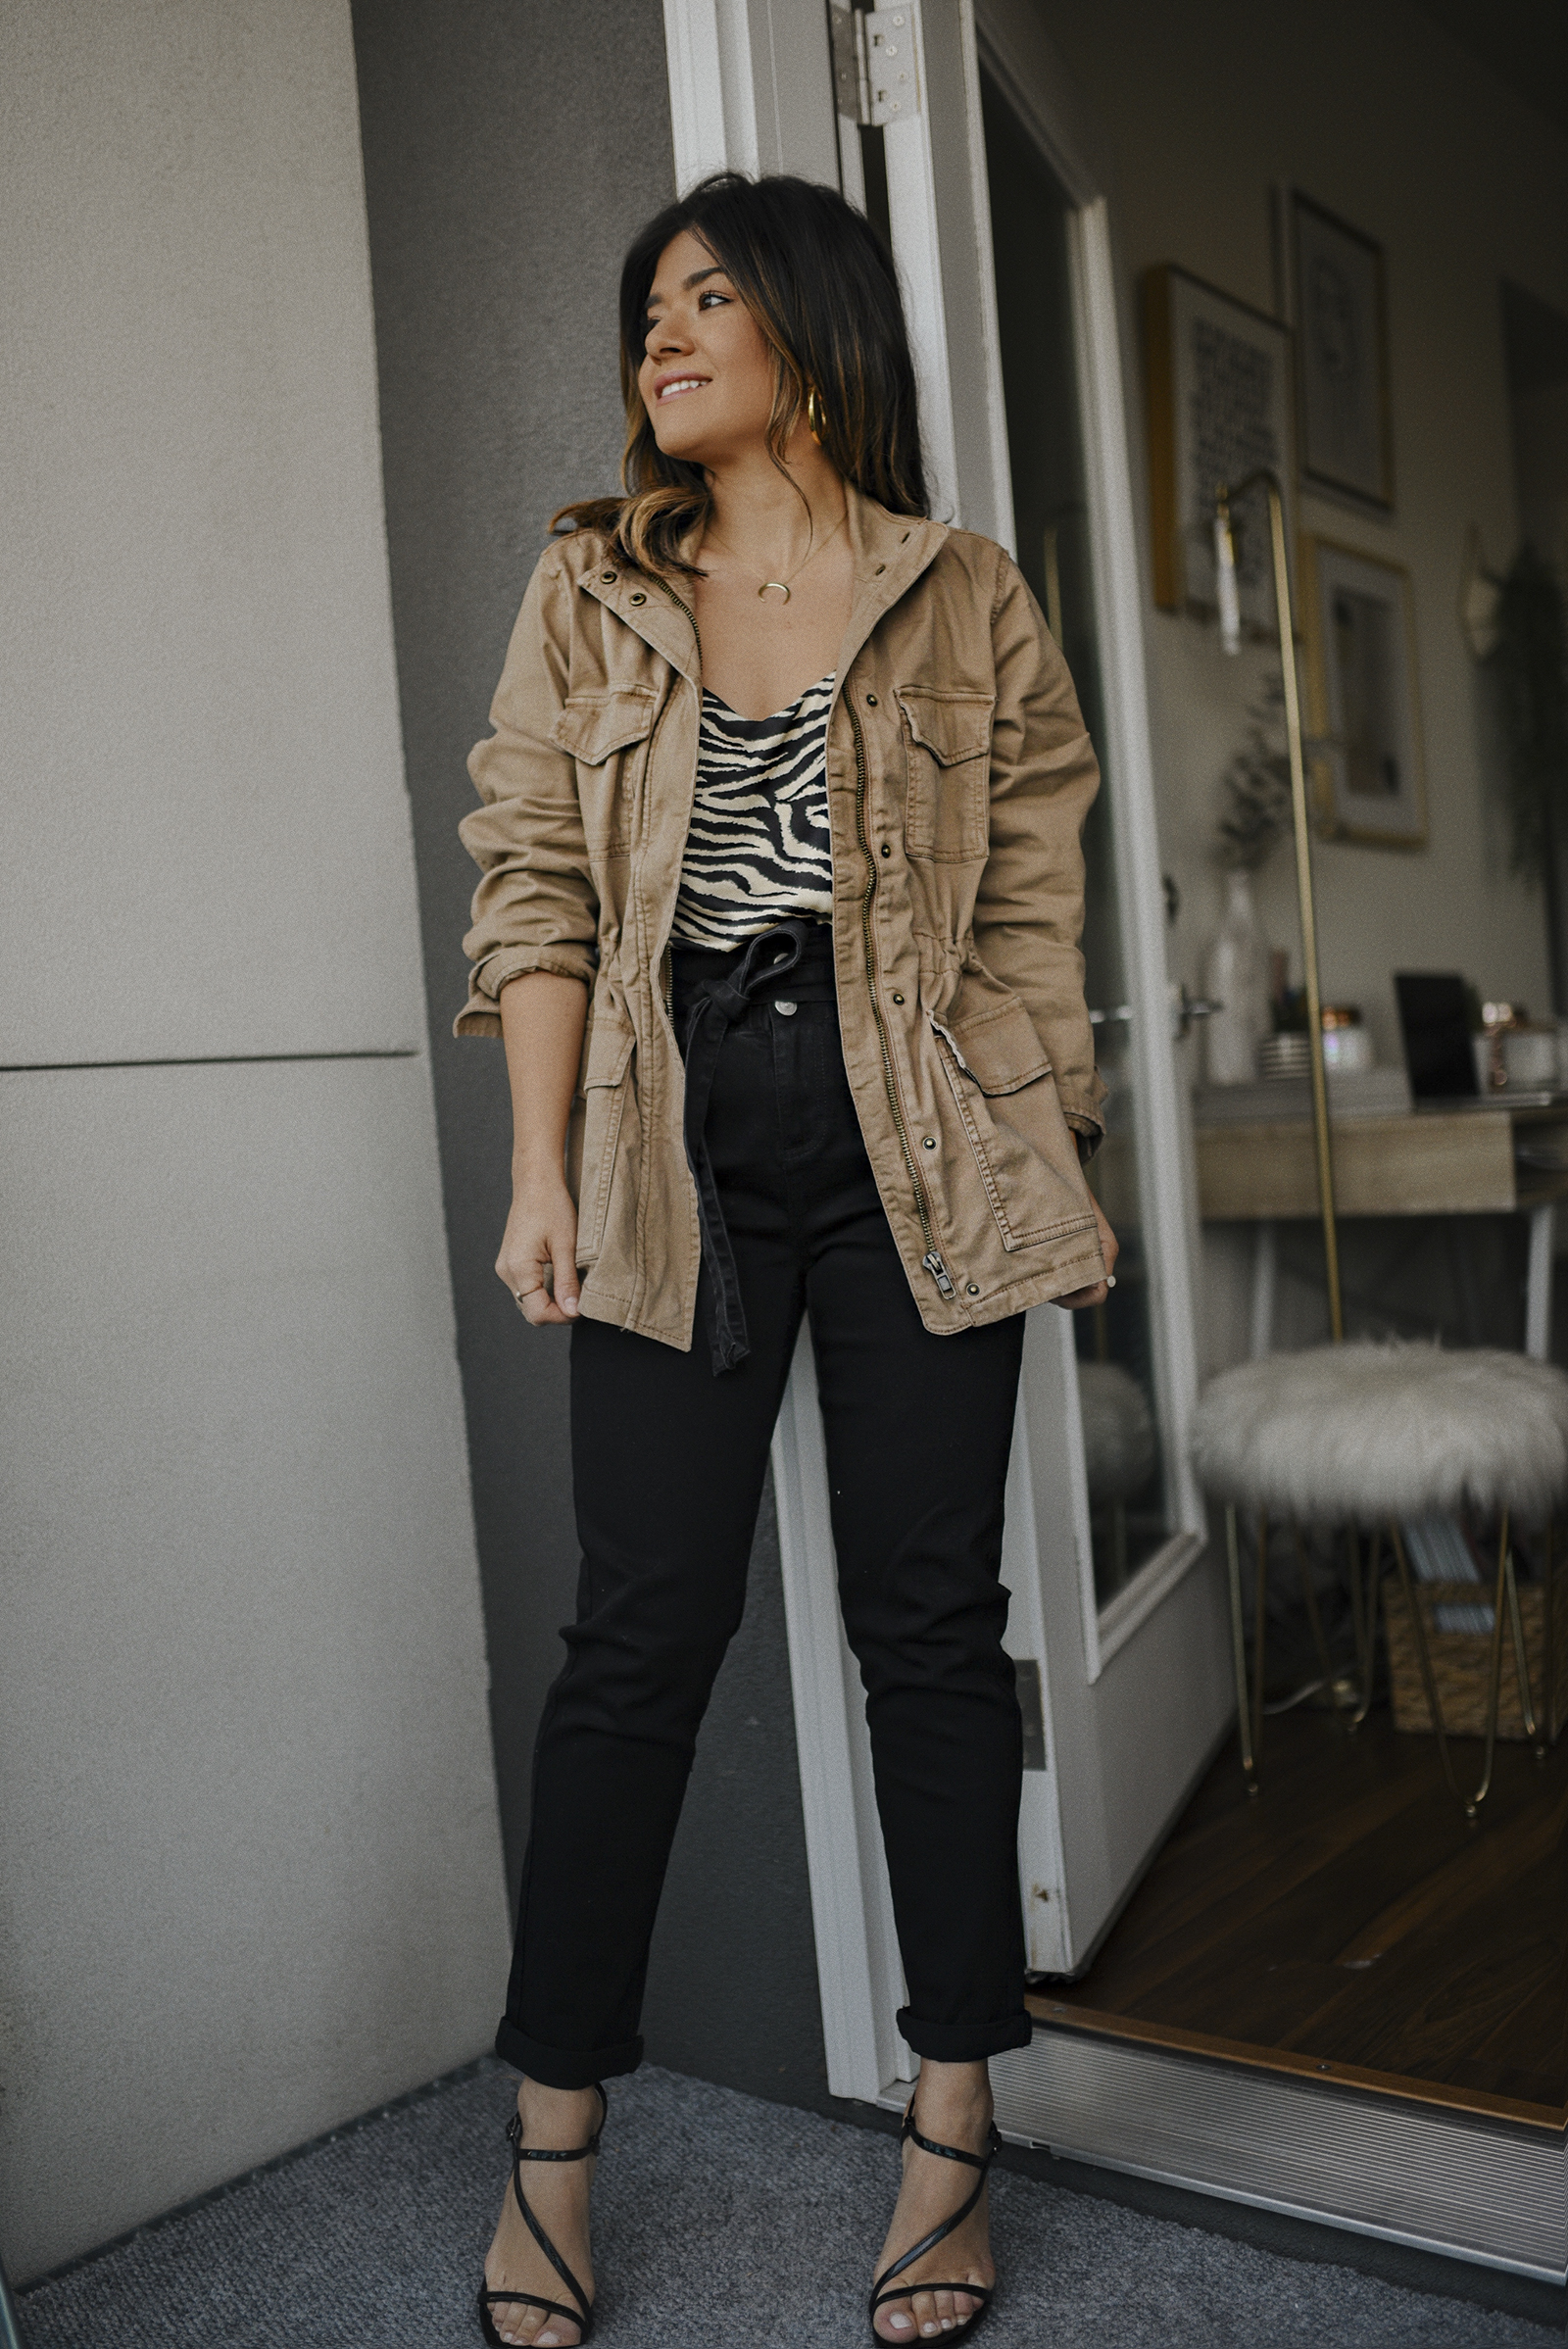 Carolina Hellal of Chic Talk wearing a utility jacket, zebra print camisole and paperbag jeans via Walmart's spring merchandise. 